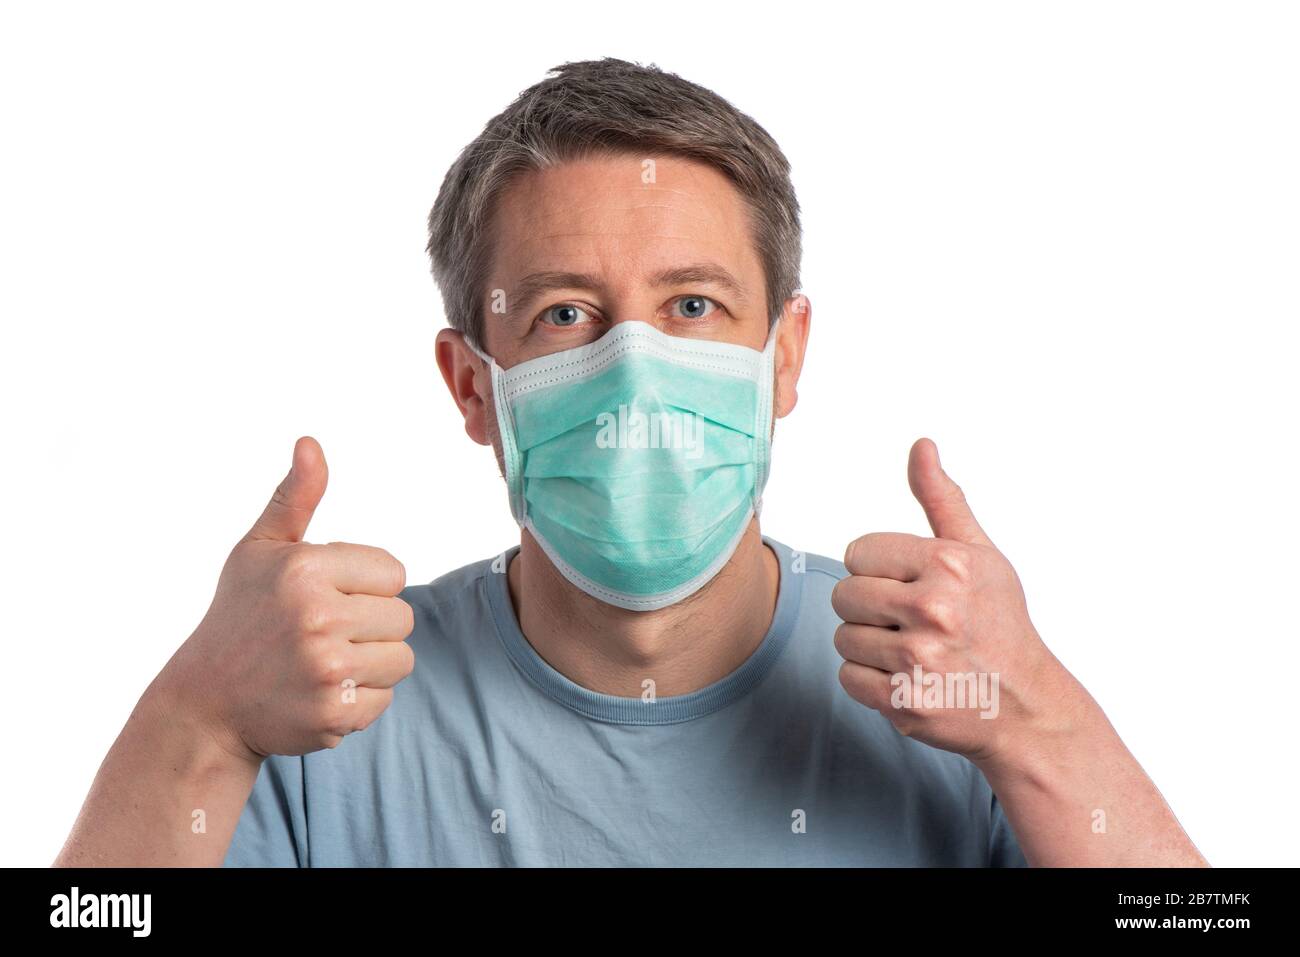 Caucasian man wearing a protection mask and making vistory sign with protective gloves on a white background Stock Photo